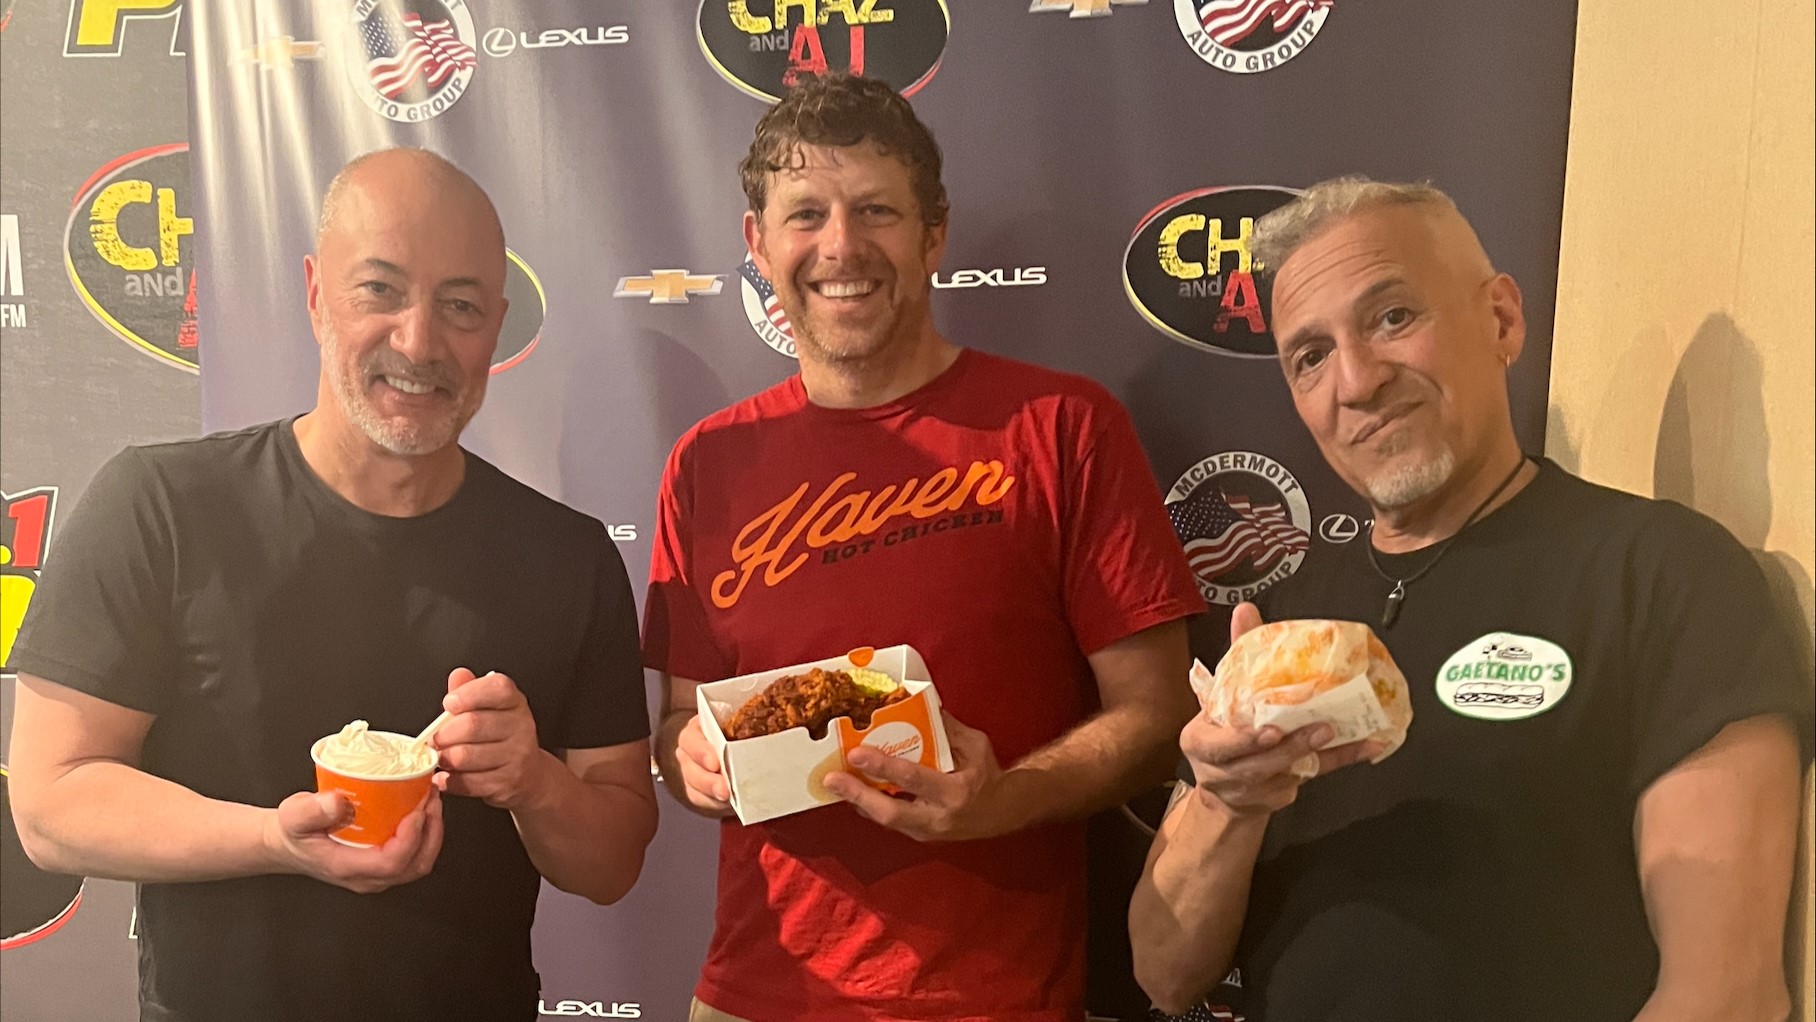 PODCAST – Friday, May 24: DMV Issues; Scot Haney’s Weekend Plans; Jason From Haven Hot Chicken